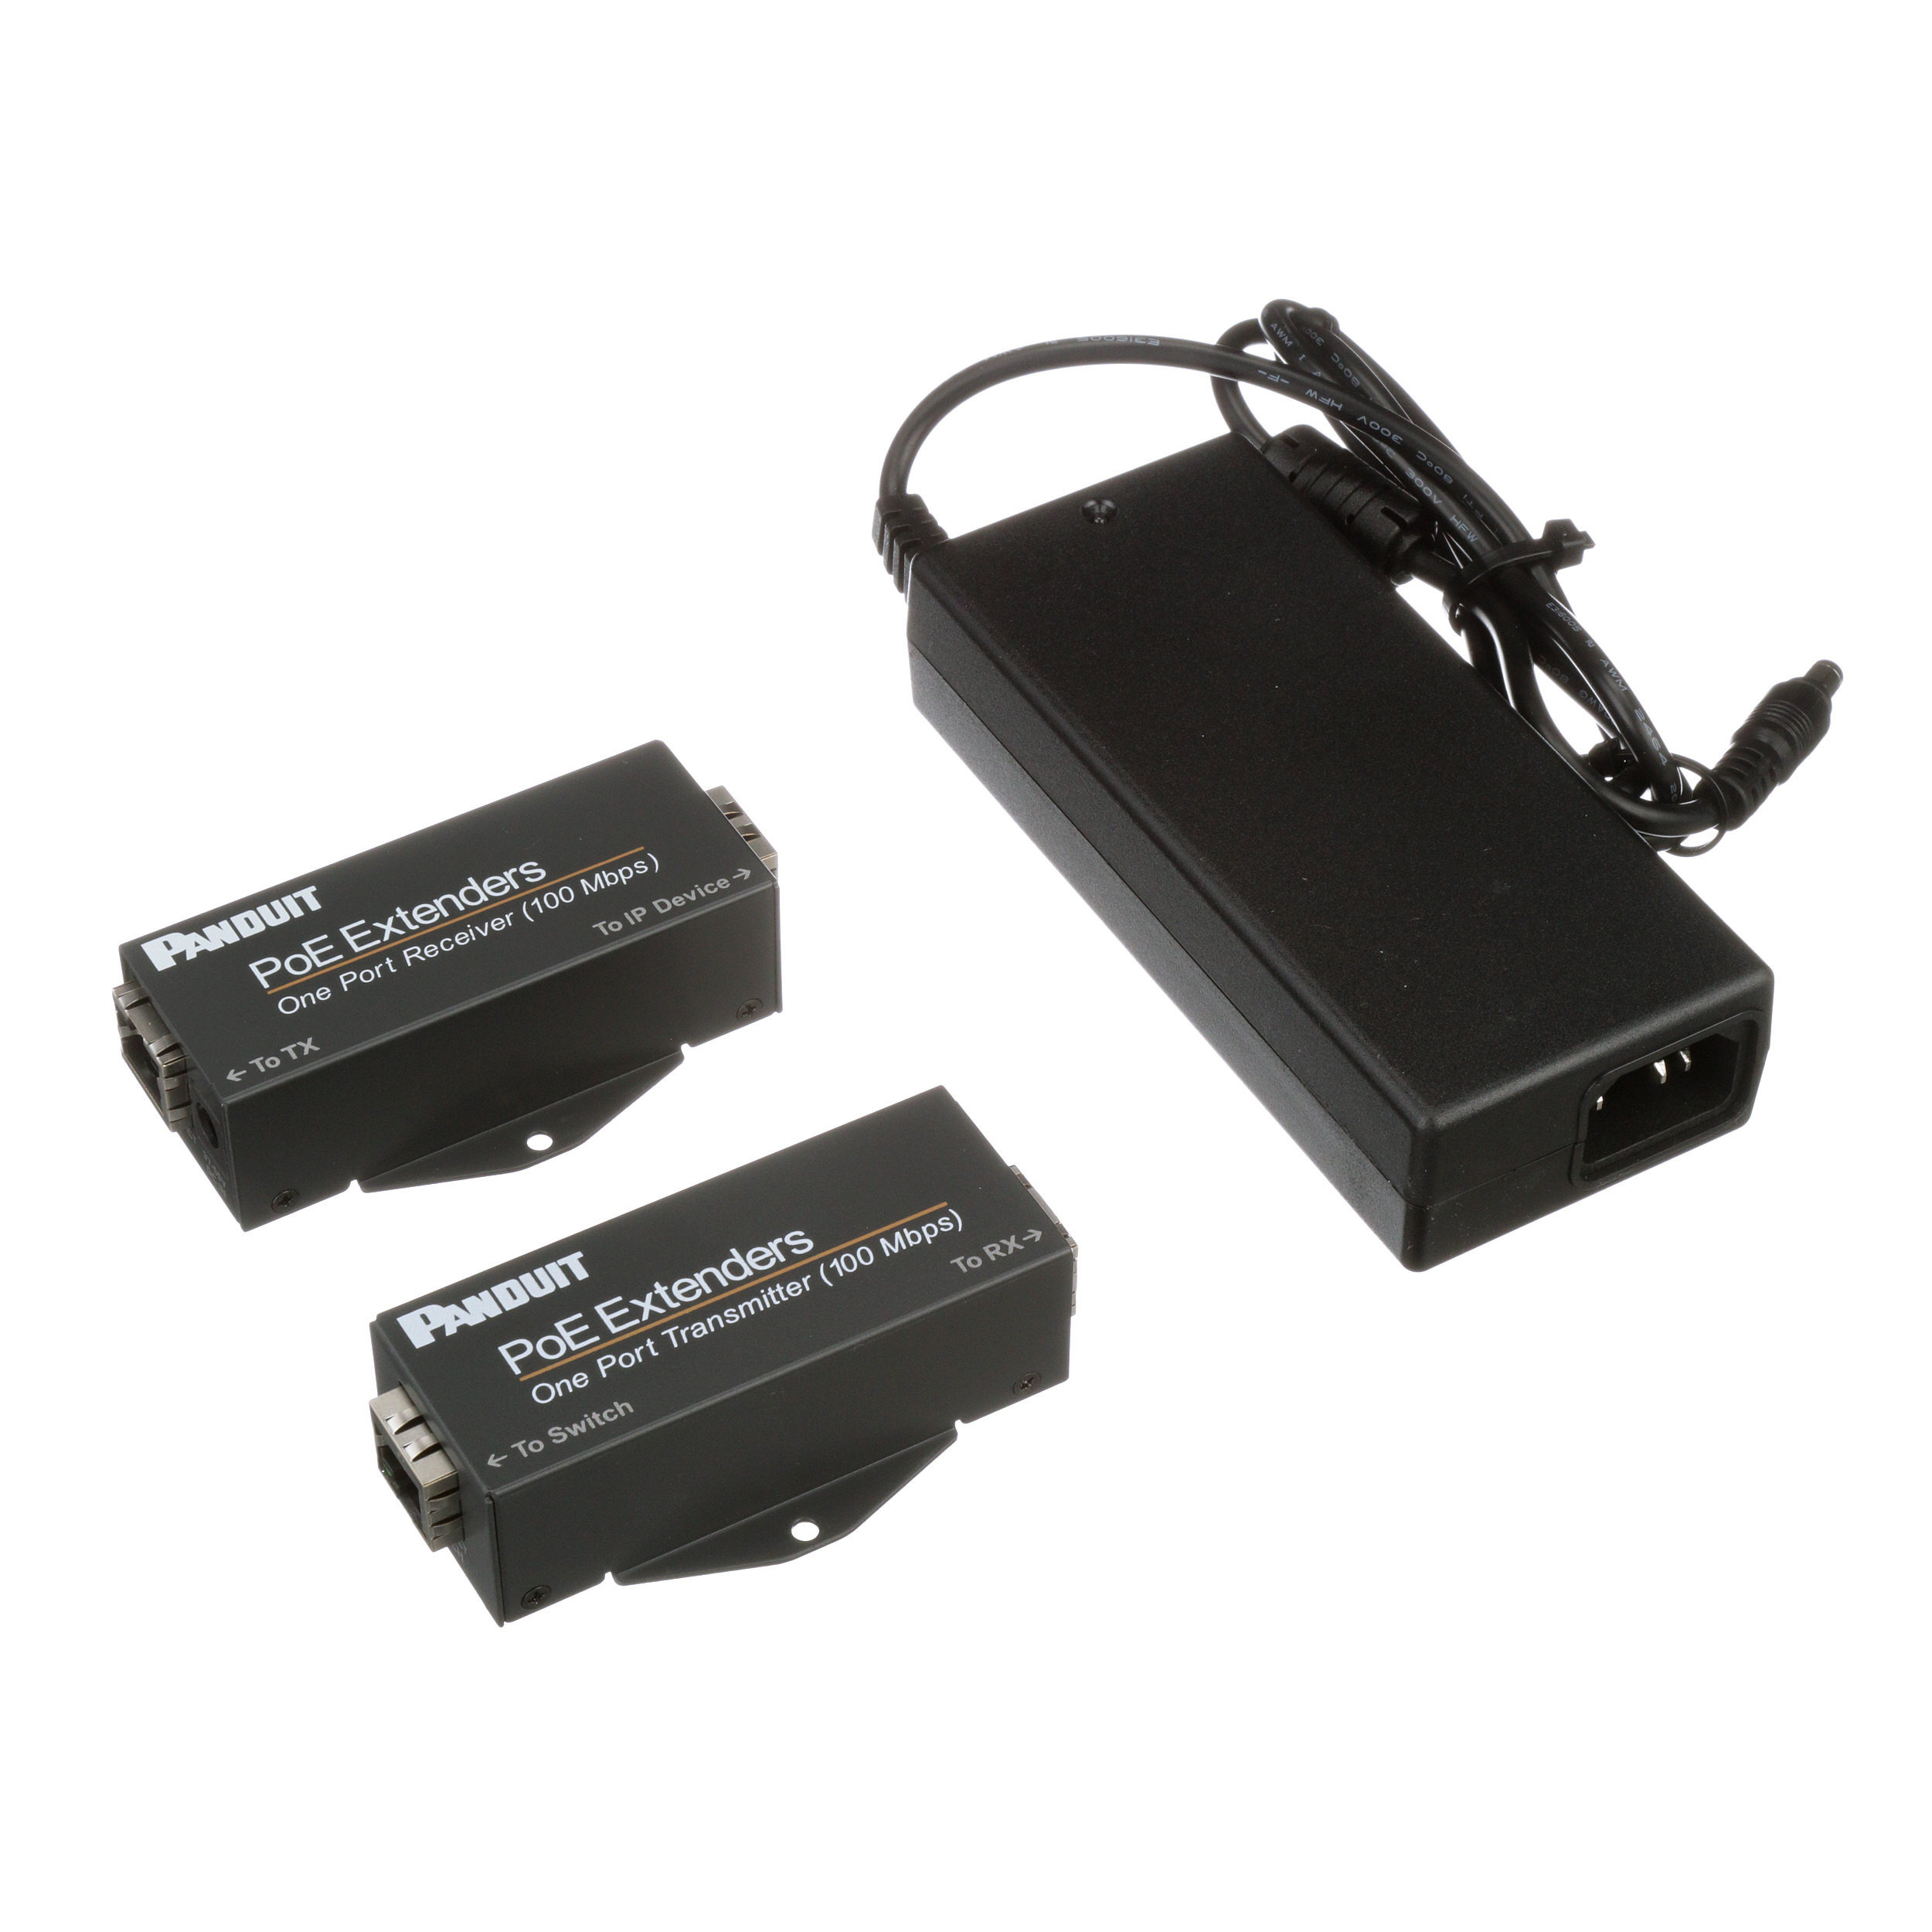 PoE Extender Kit with 1 Port Tx And Rx Box, 60W PS, No Power Cord